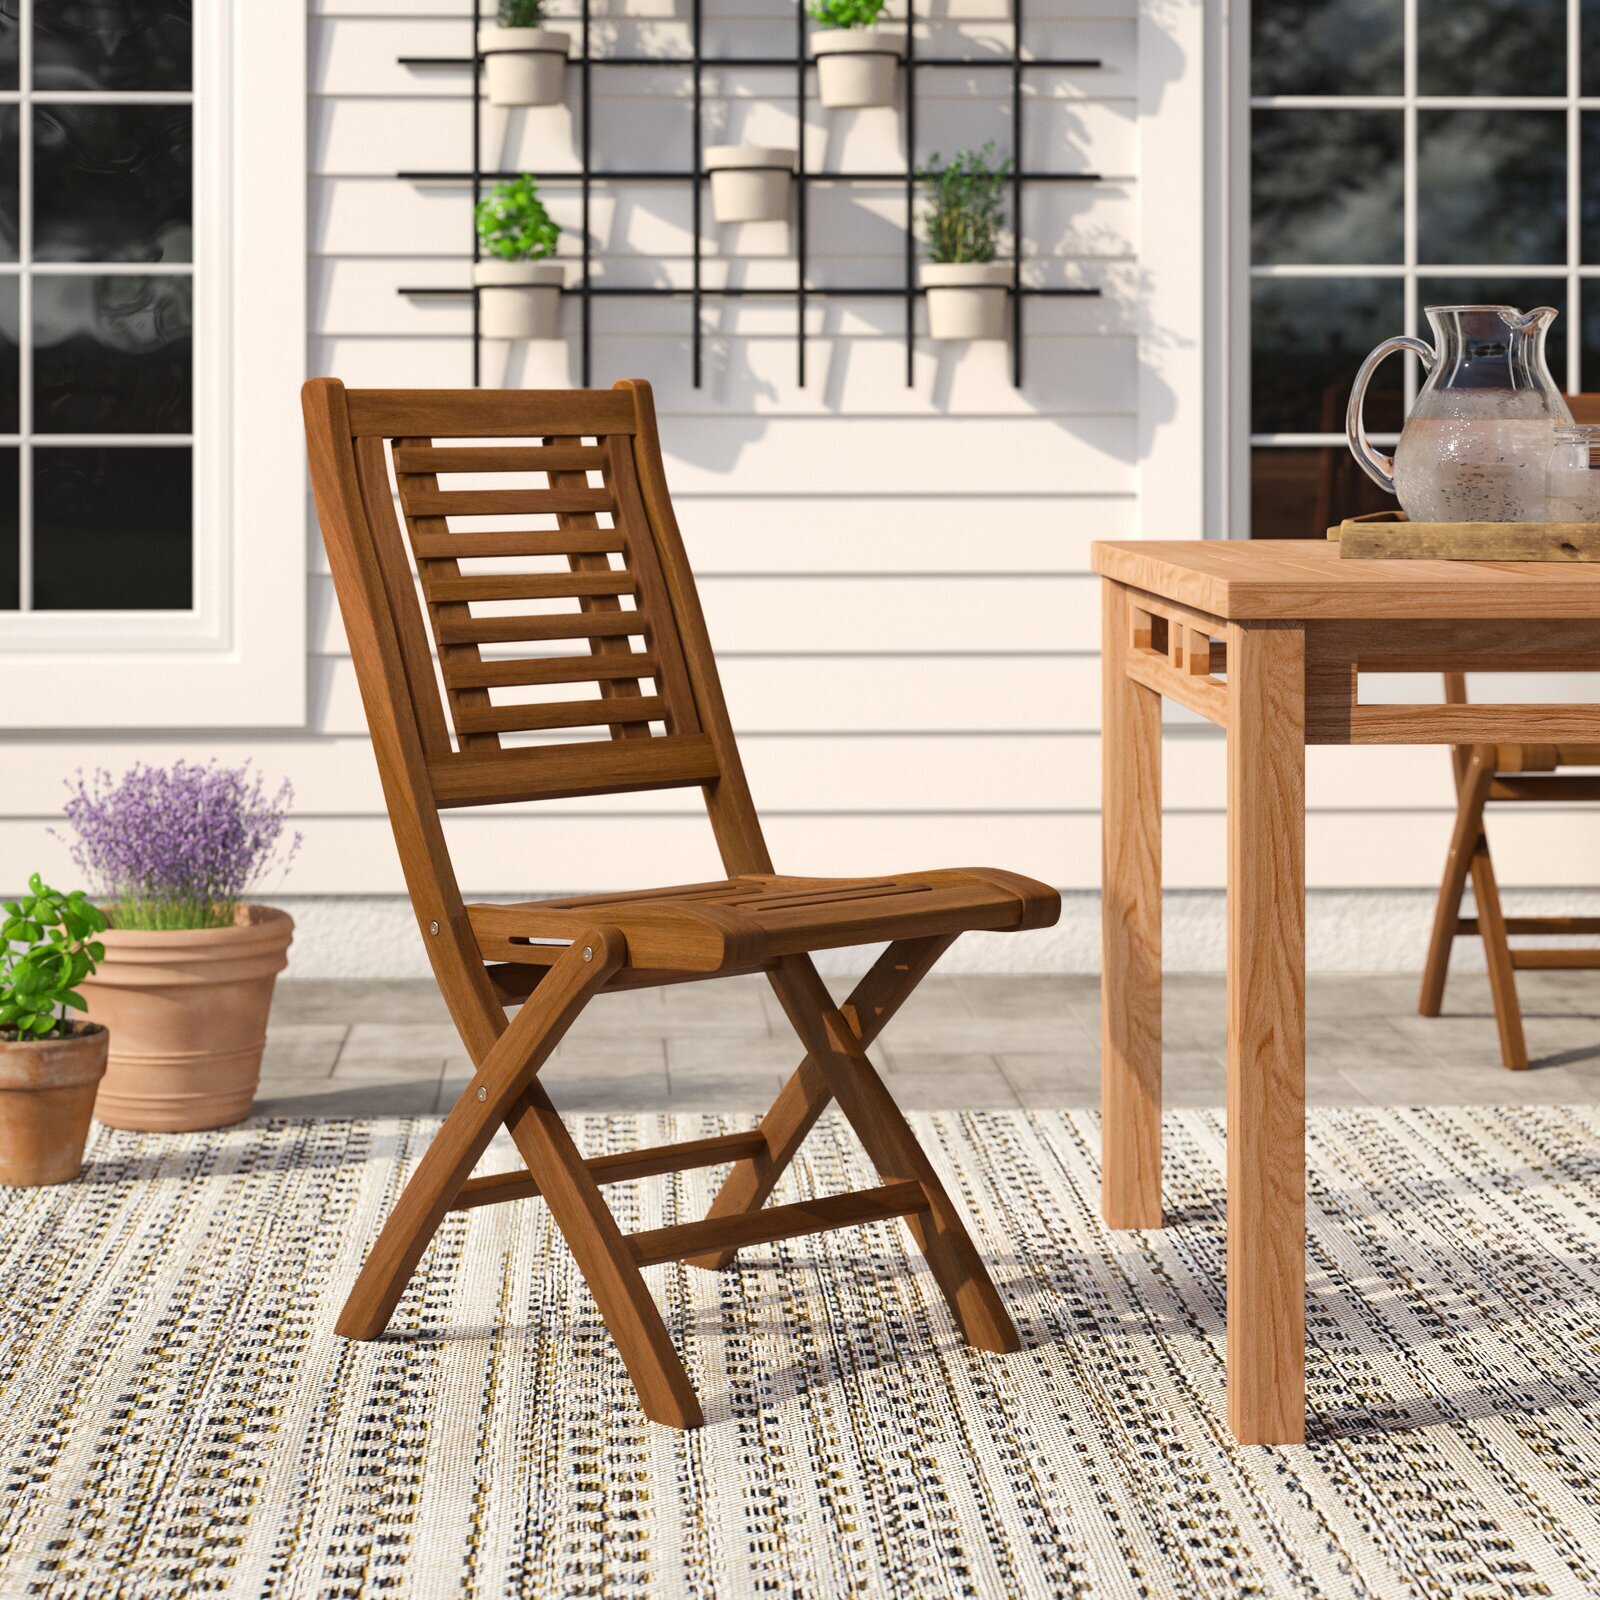 Patio foldable dining chairs